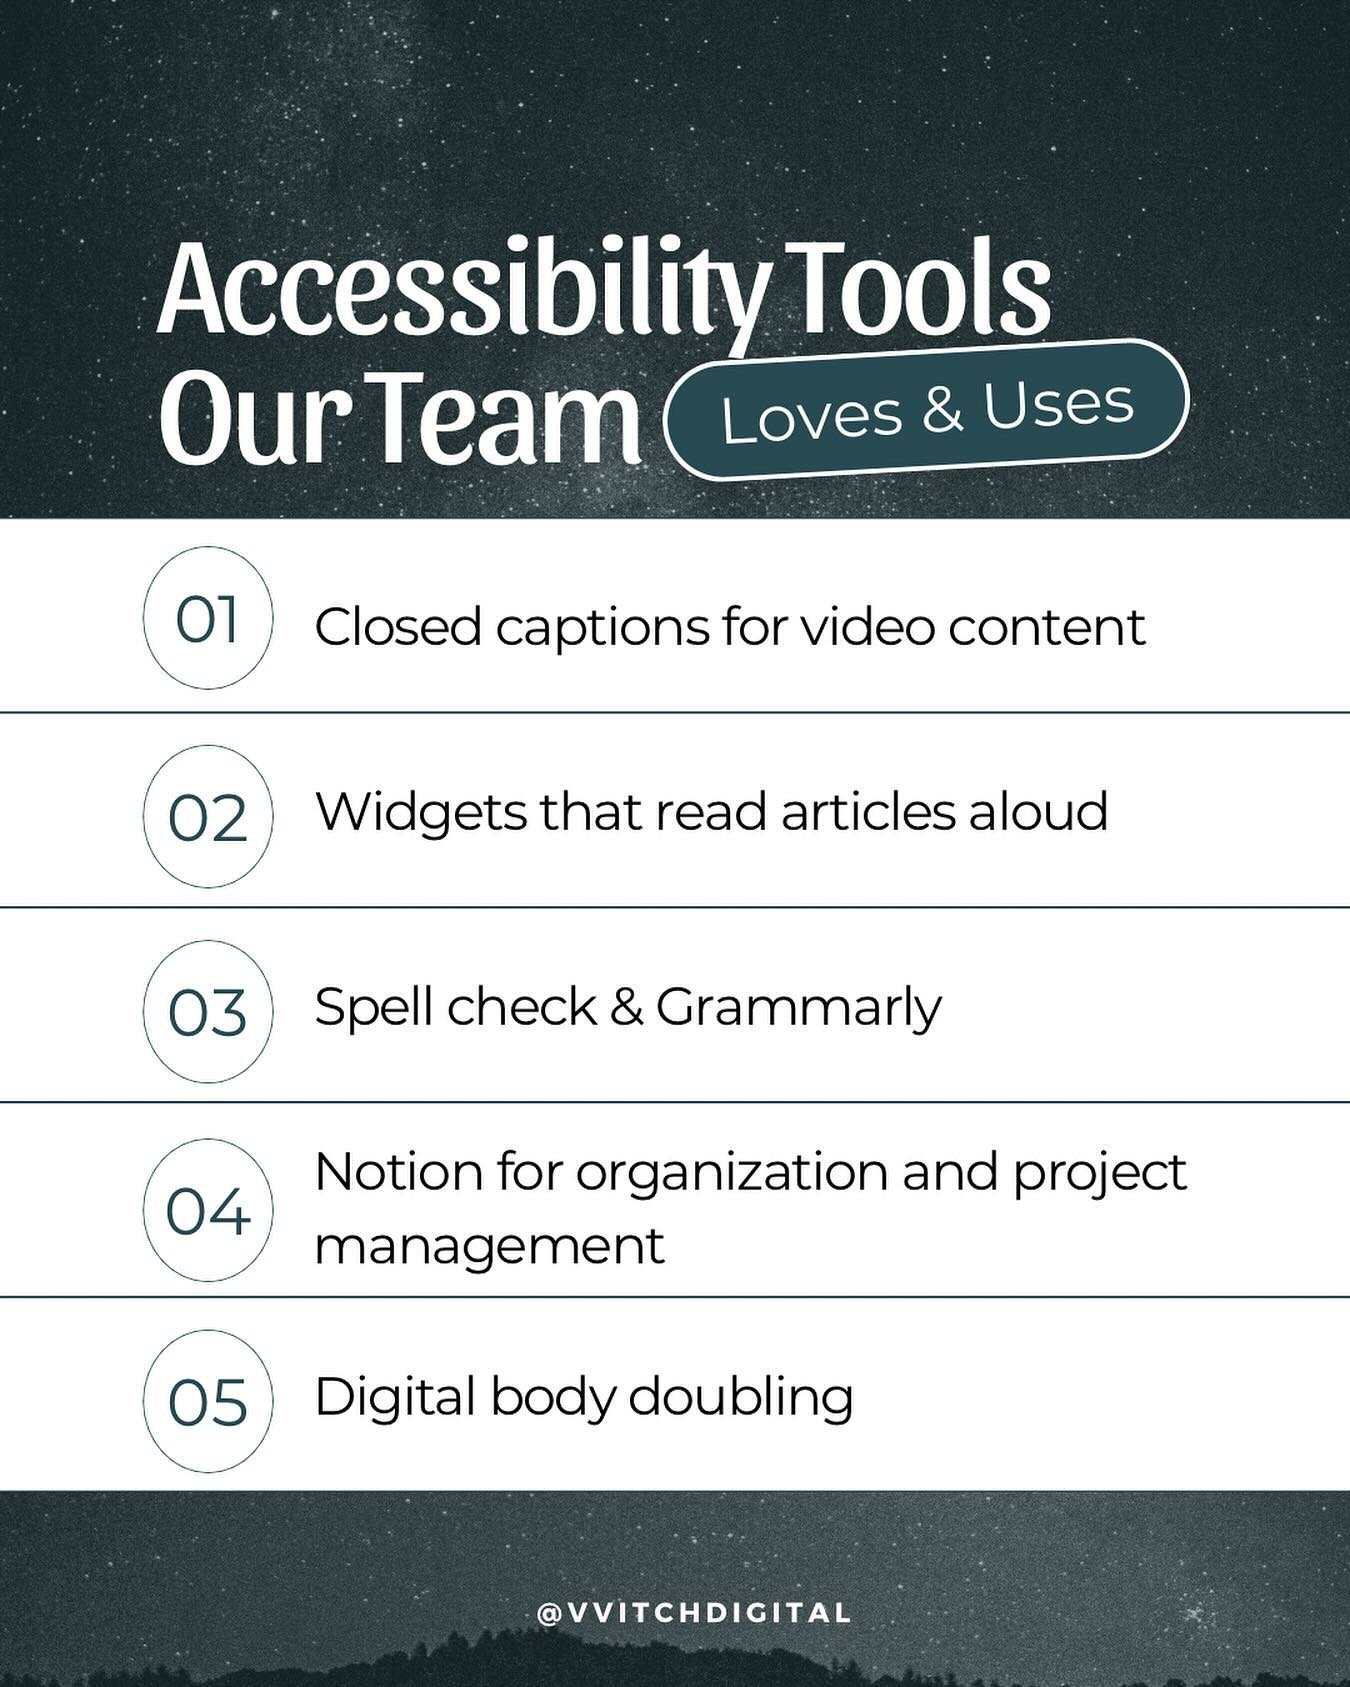 Tomorrow is Global Accessibility Awareness Day and we wanted to start celebrating #GAAD early with our fave accessibility tools we use 🧰 

The VVITCH team cares deeply about accessibility and not just because it&rsquo;s the right thing to do. We als